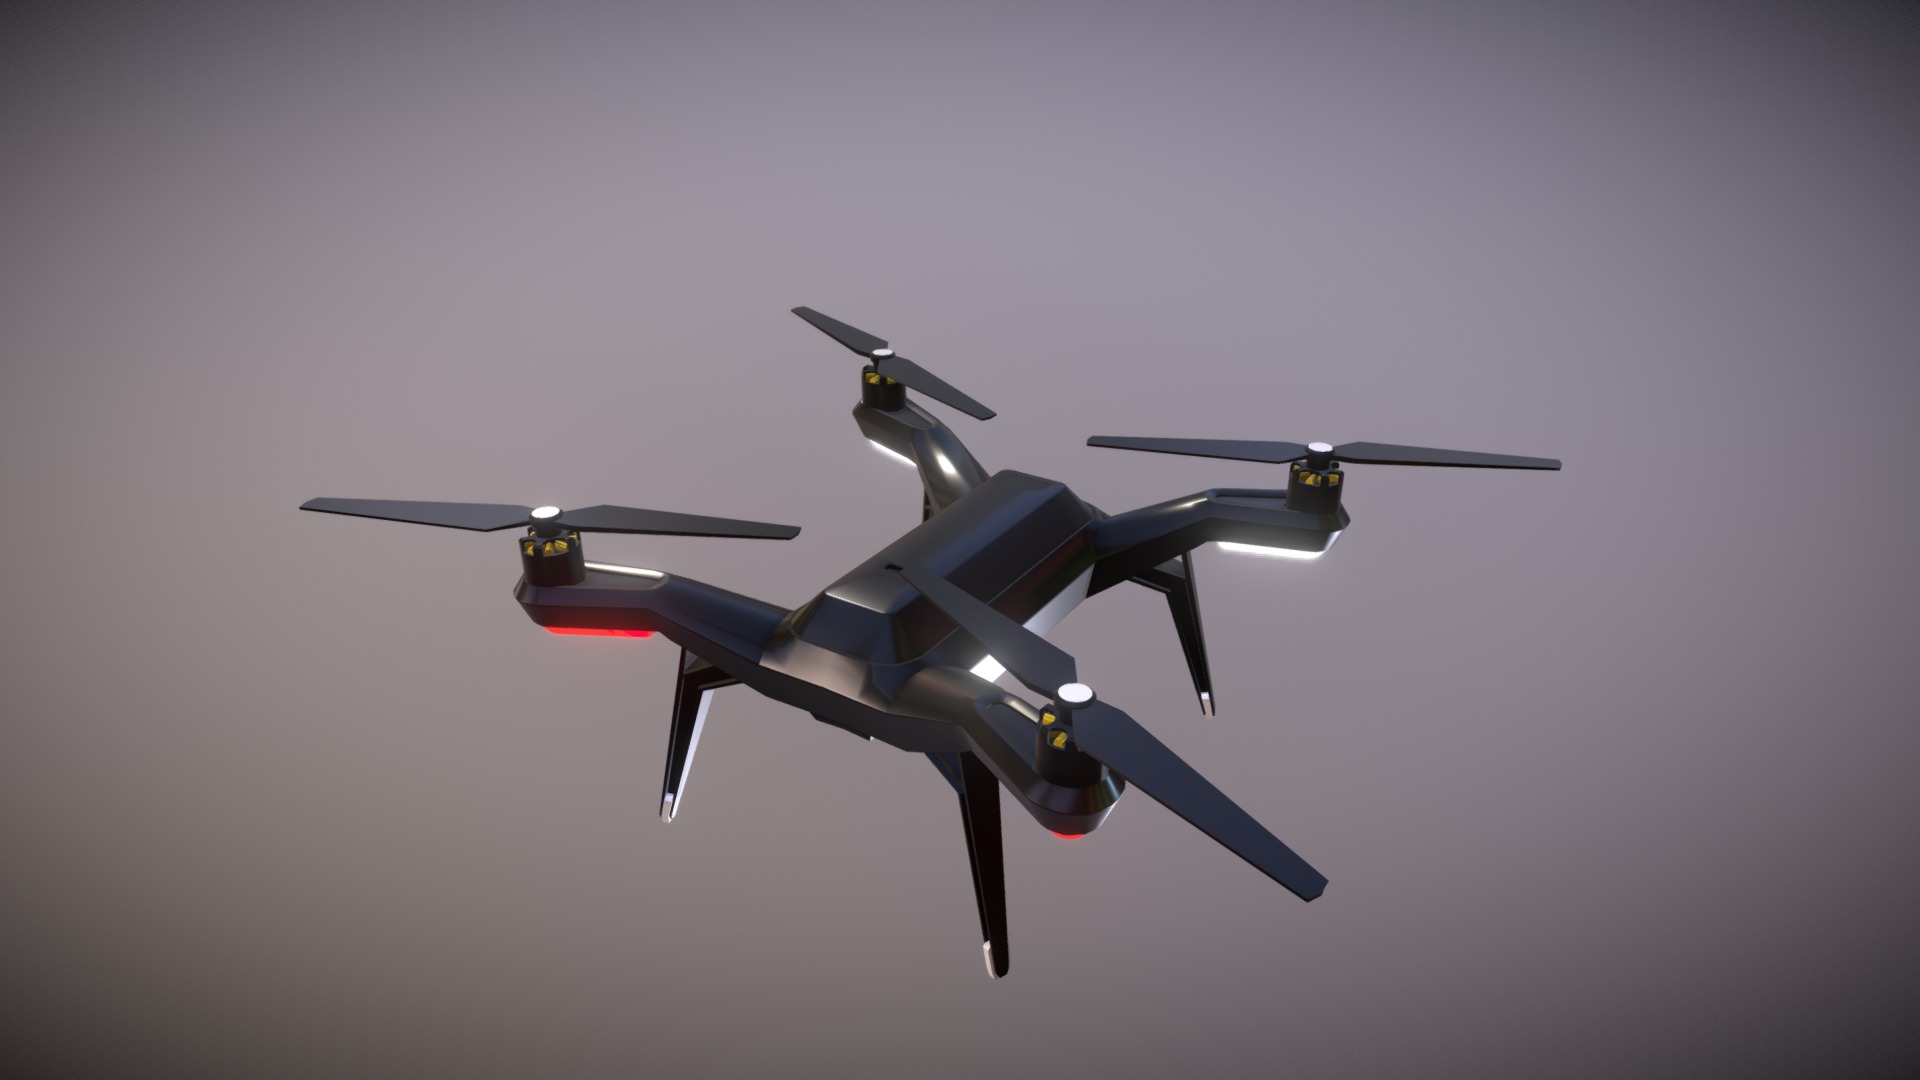 3D model 3DR Solo Drone Low poly Animated - This is a 3D model of the 3DR Solo Drone Low poly Animated. The 3D model is about a drone flying in the sky.